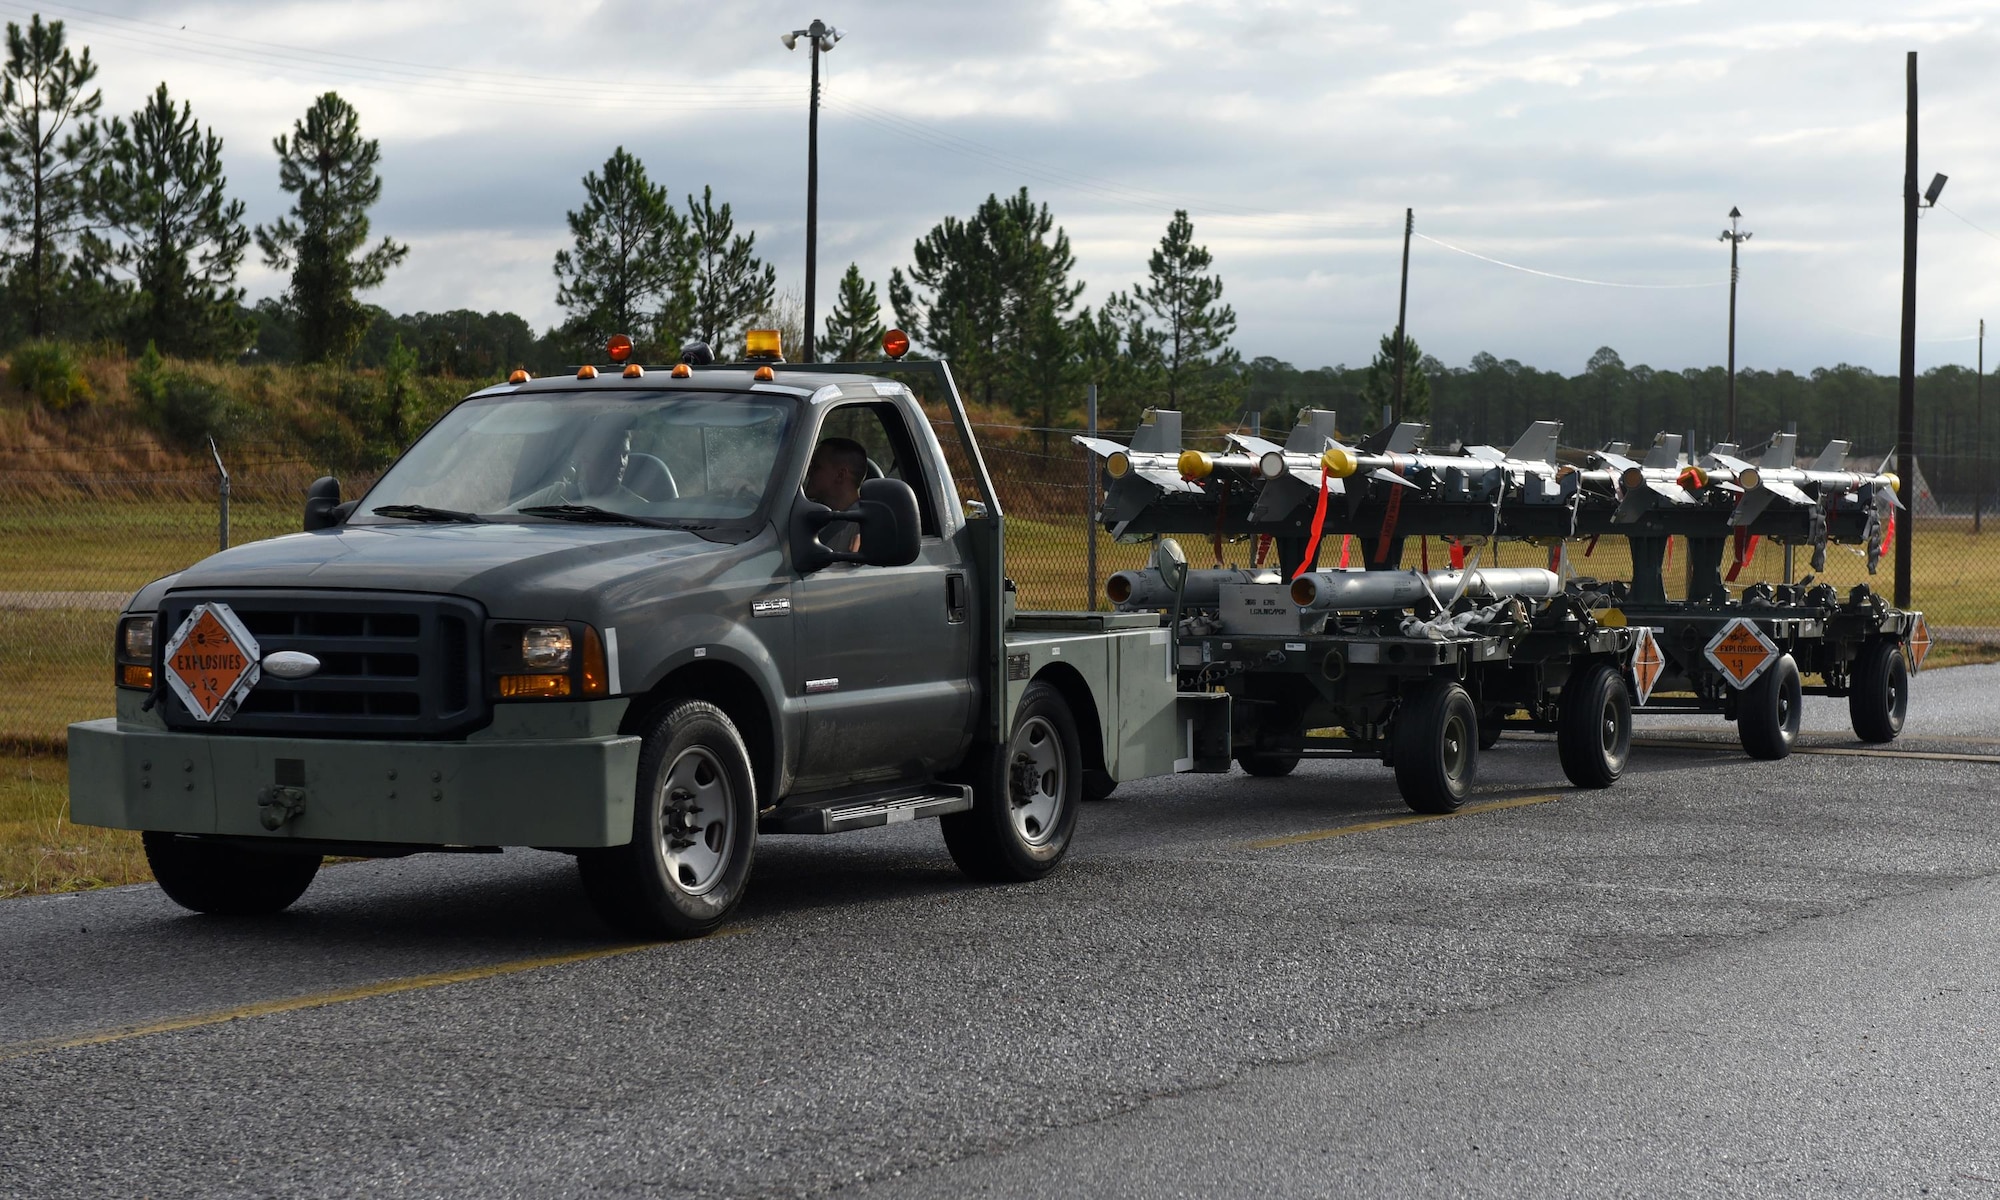 Munitions systems specialist transport weapons systems racks to the flightline during Checkered Flag 17-1 and Combat Archer 17-3, two exercises that ran concurrently at Tyndall Air Force Base, Fla., Dec. 14, 2016. Exercises such as Checkered Flag and Combat Archer are meant to evaluate the performance of coordinating fifth-generation and legacy fighters during large-scale engagements. (U.S. Air Force photo by Airman 1st Class Cody R. Miller/Released)